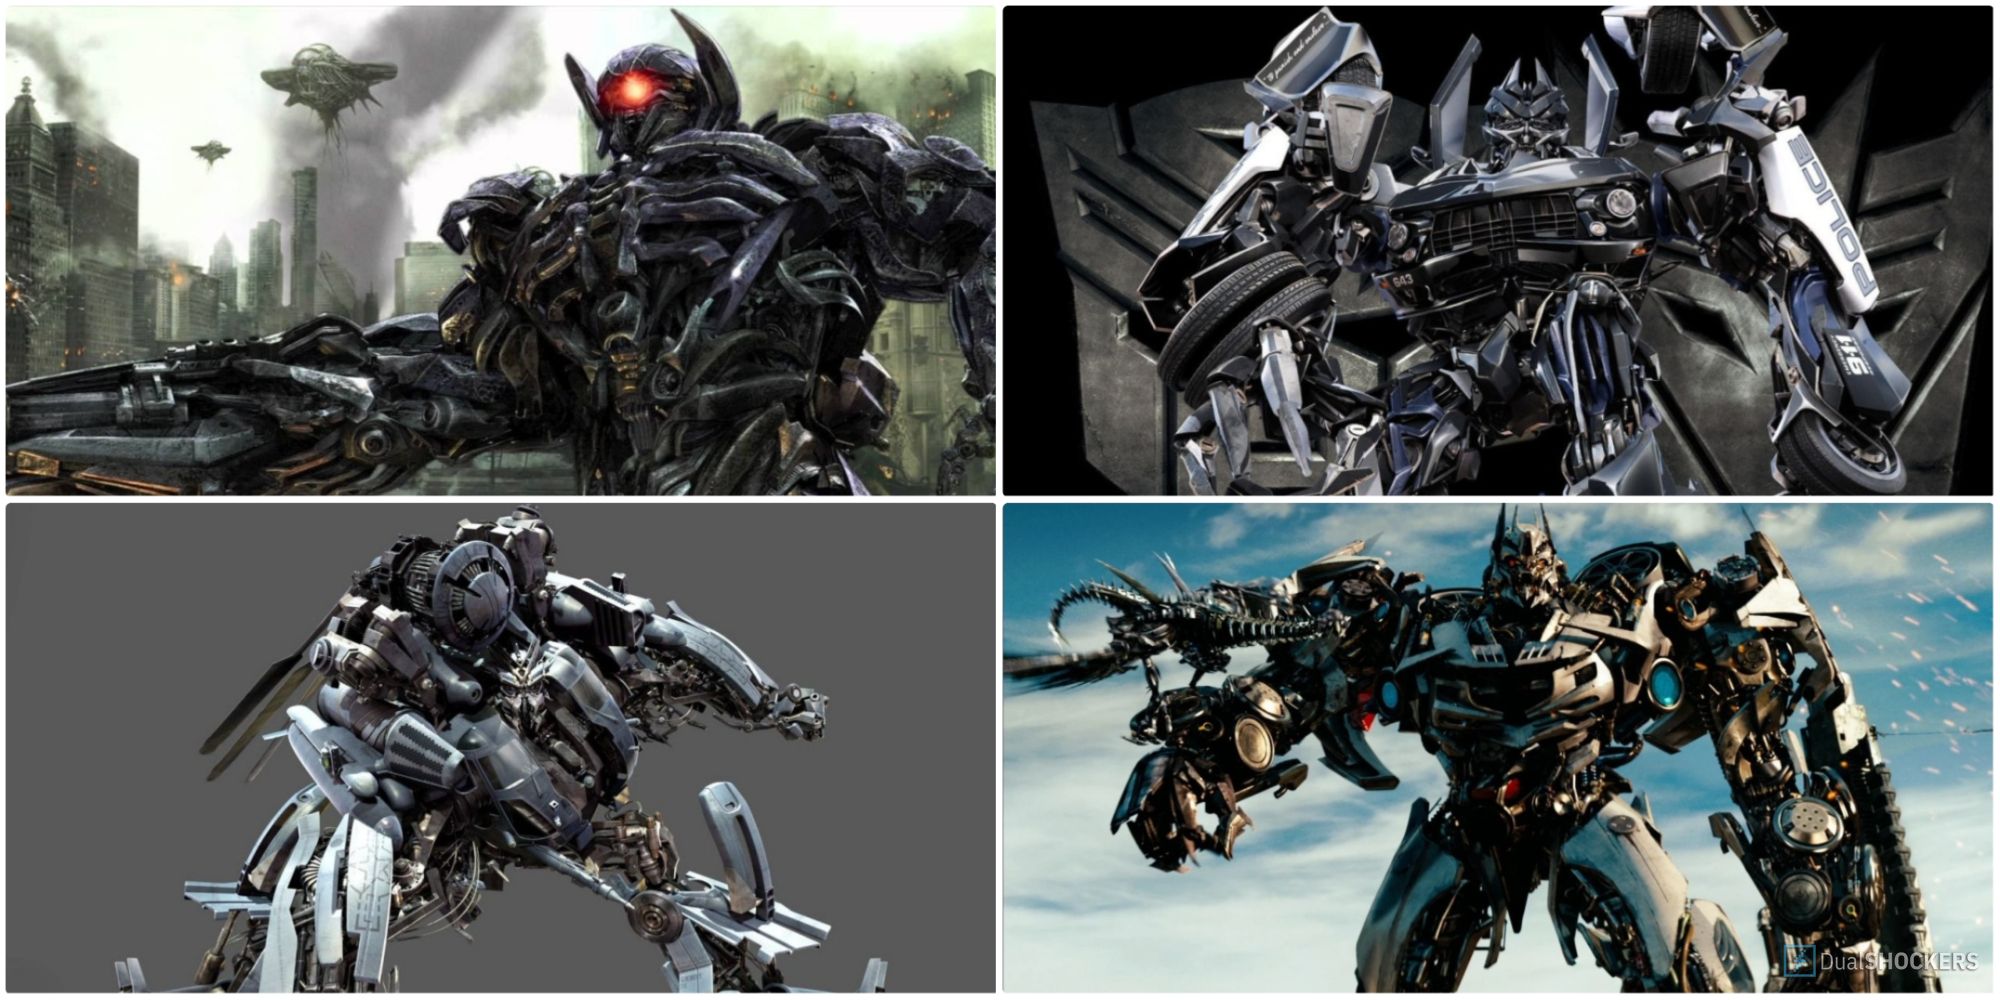 decepticons names in transformers 3